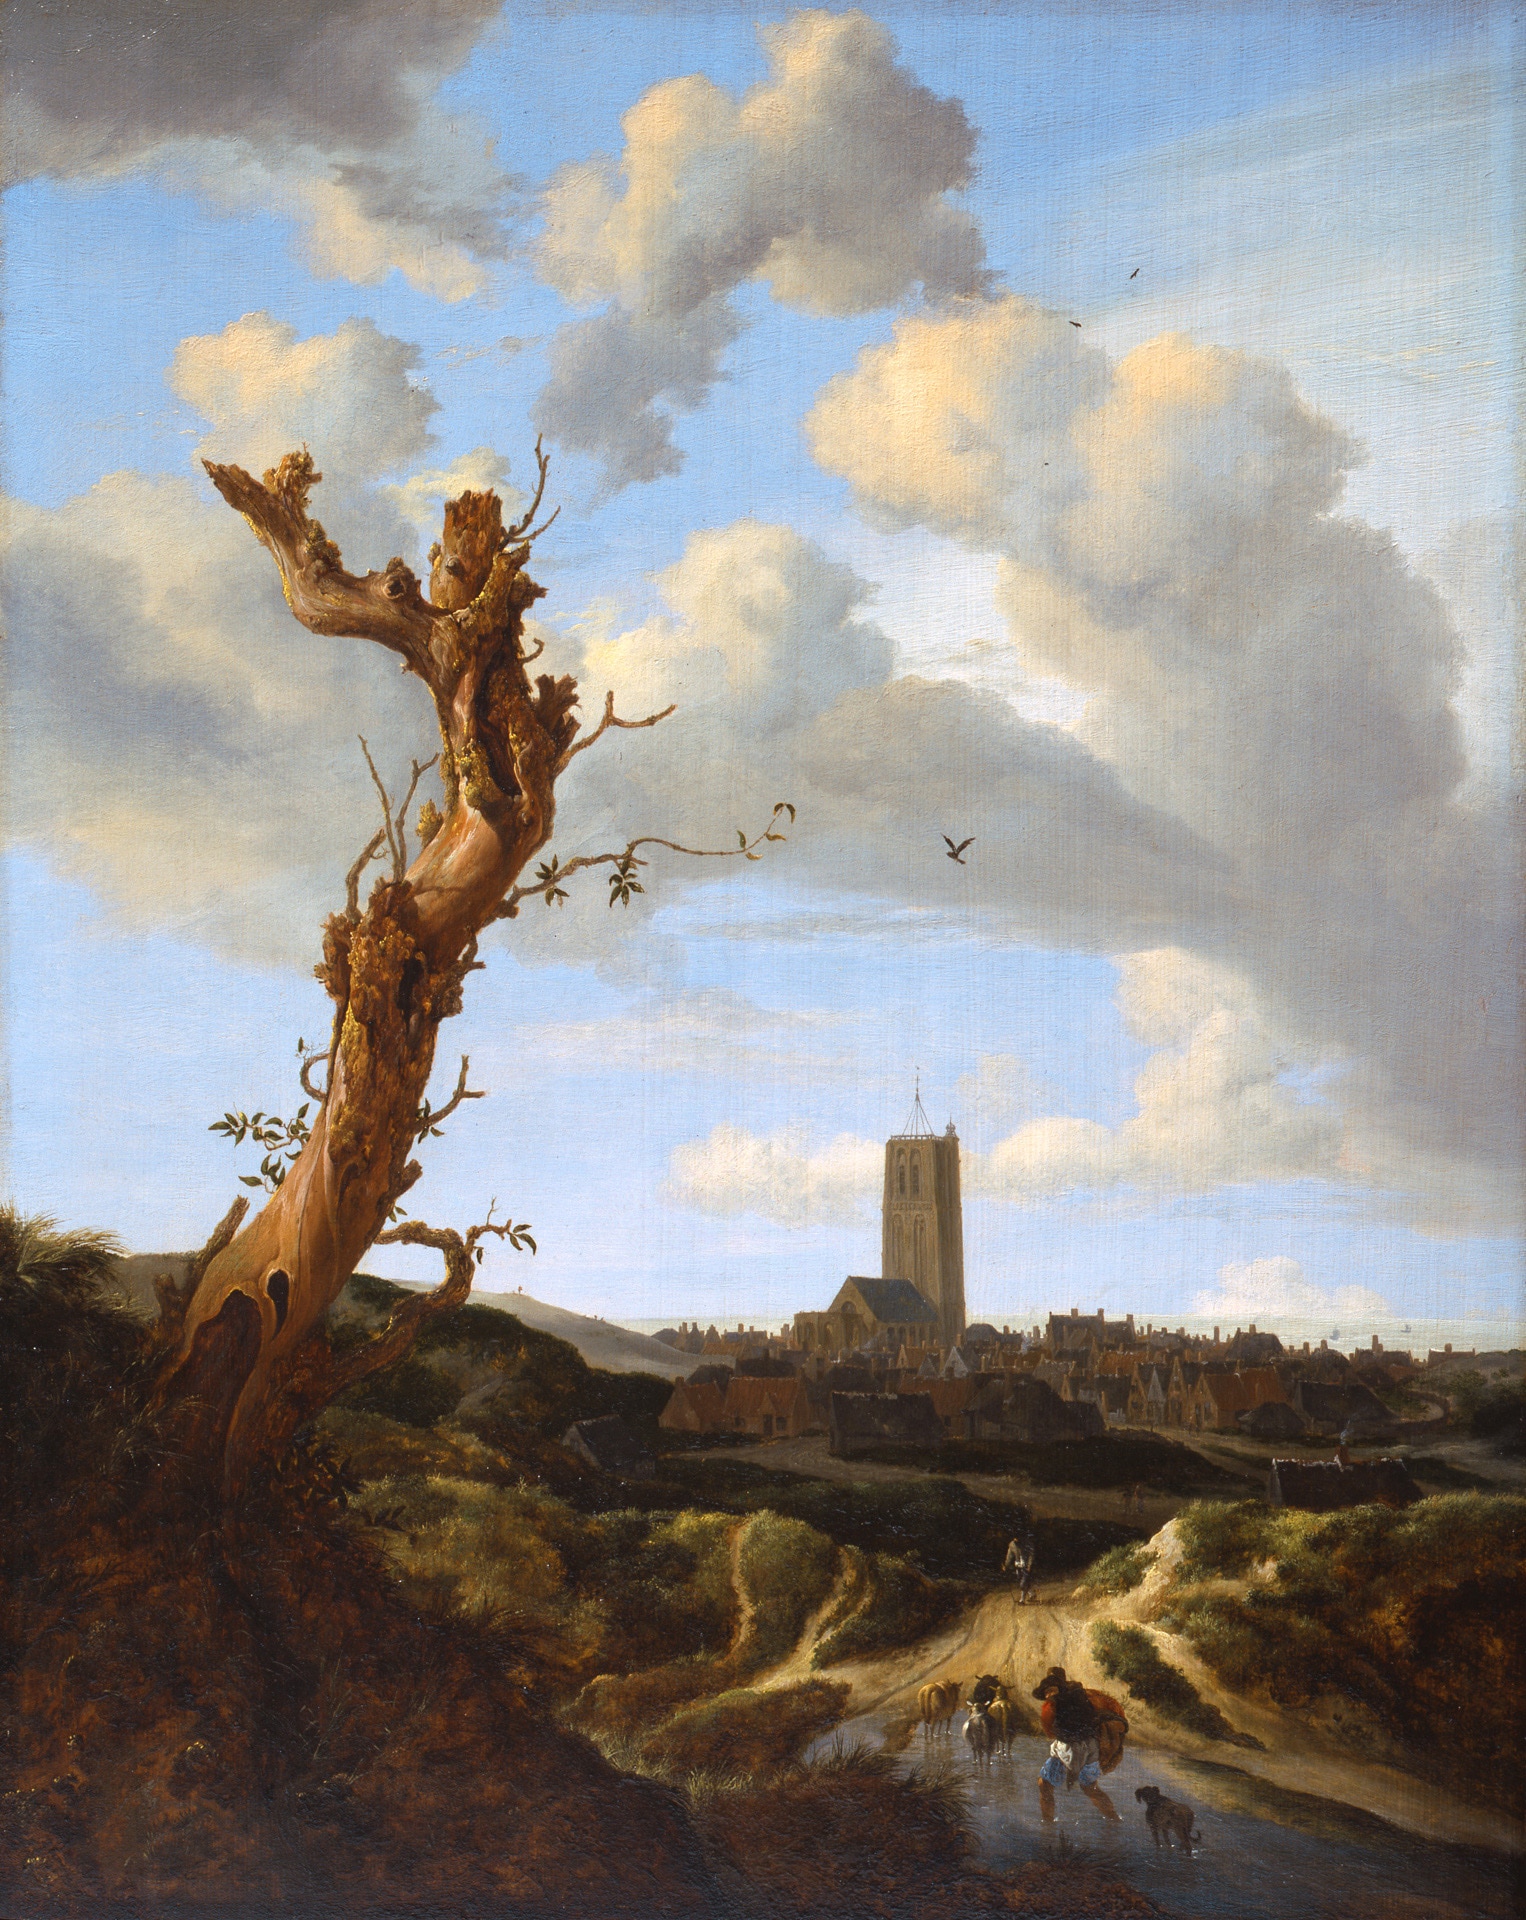 a landscape with a blasted tree in the foreground and a man walking along a path to a city in the background